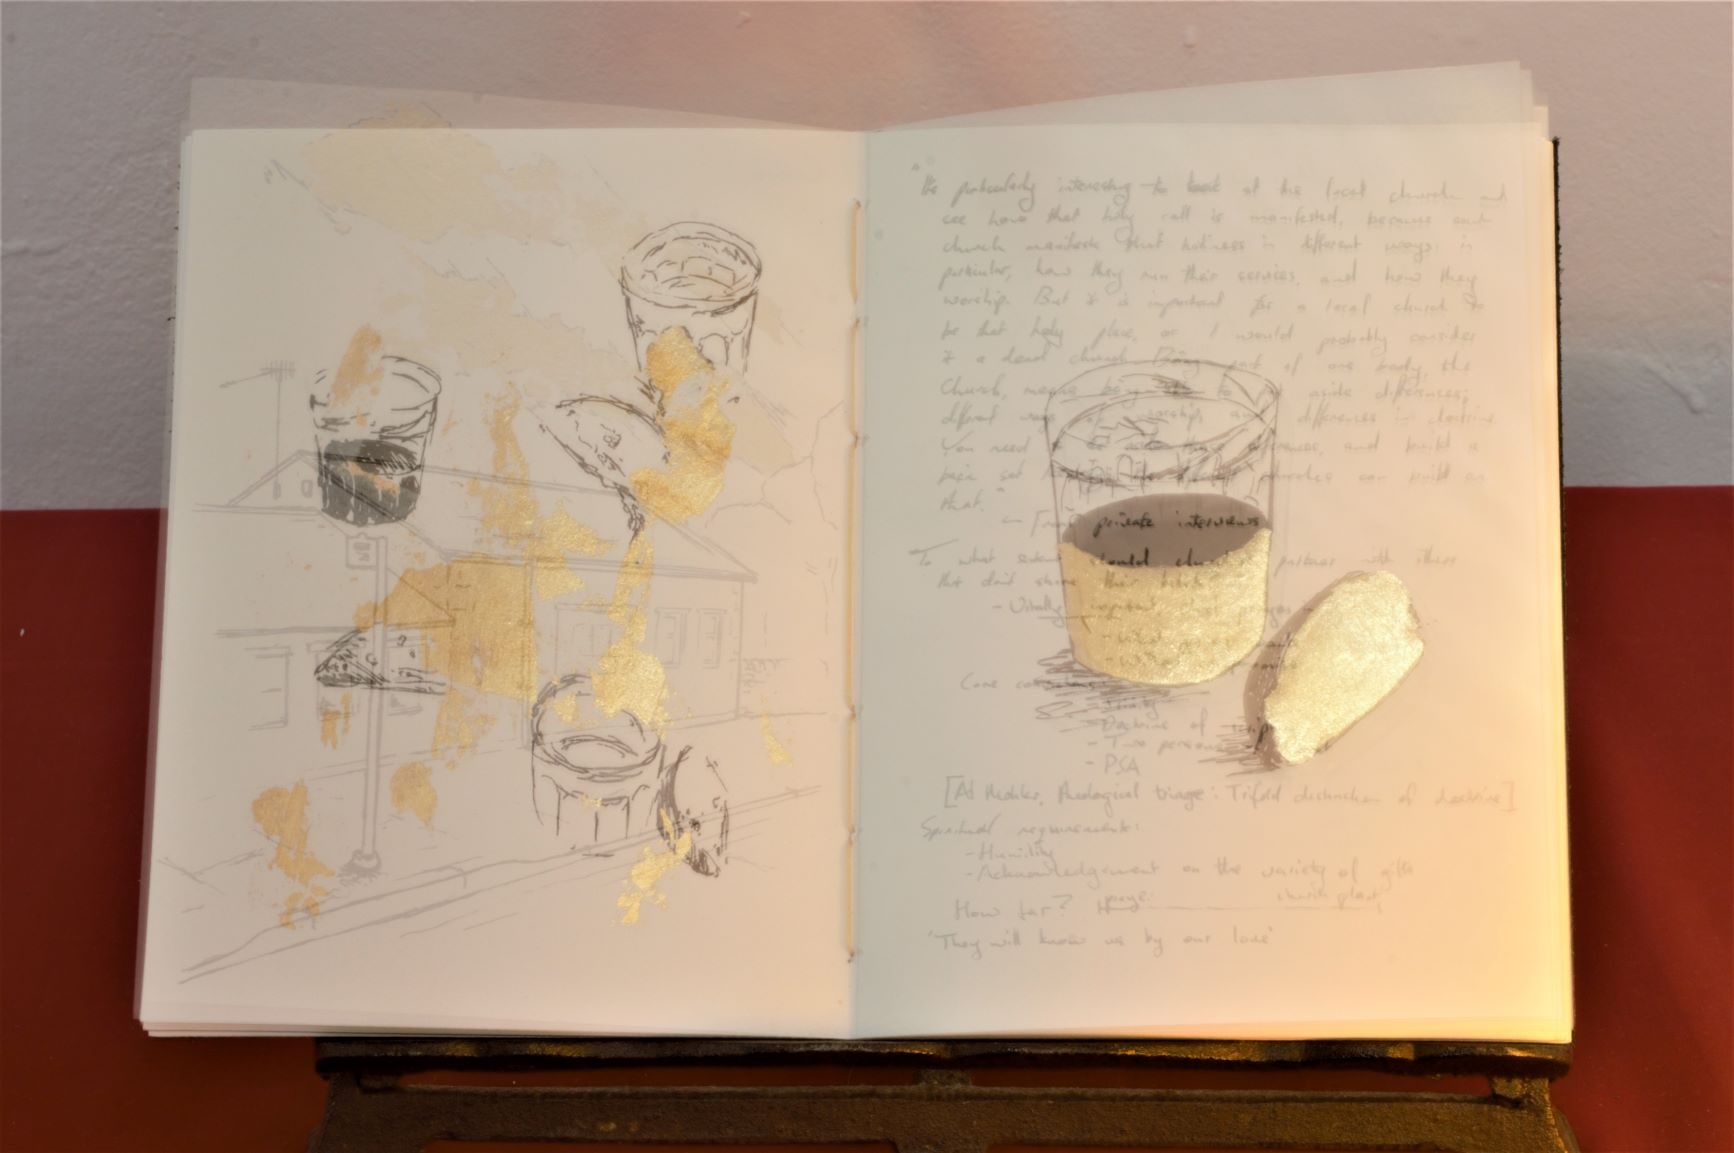 A duel exposure image of a handmade book, one leaf showing a drawing of a church and some notes, the other showing some sketches of communion bread and win with gold leaf